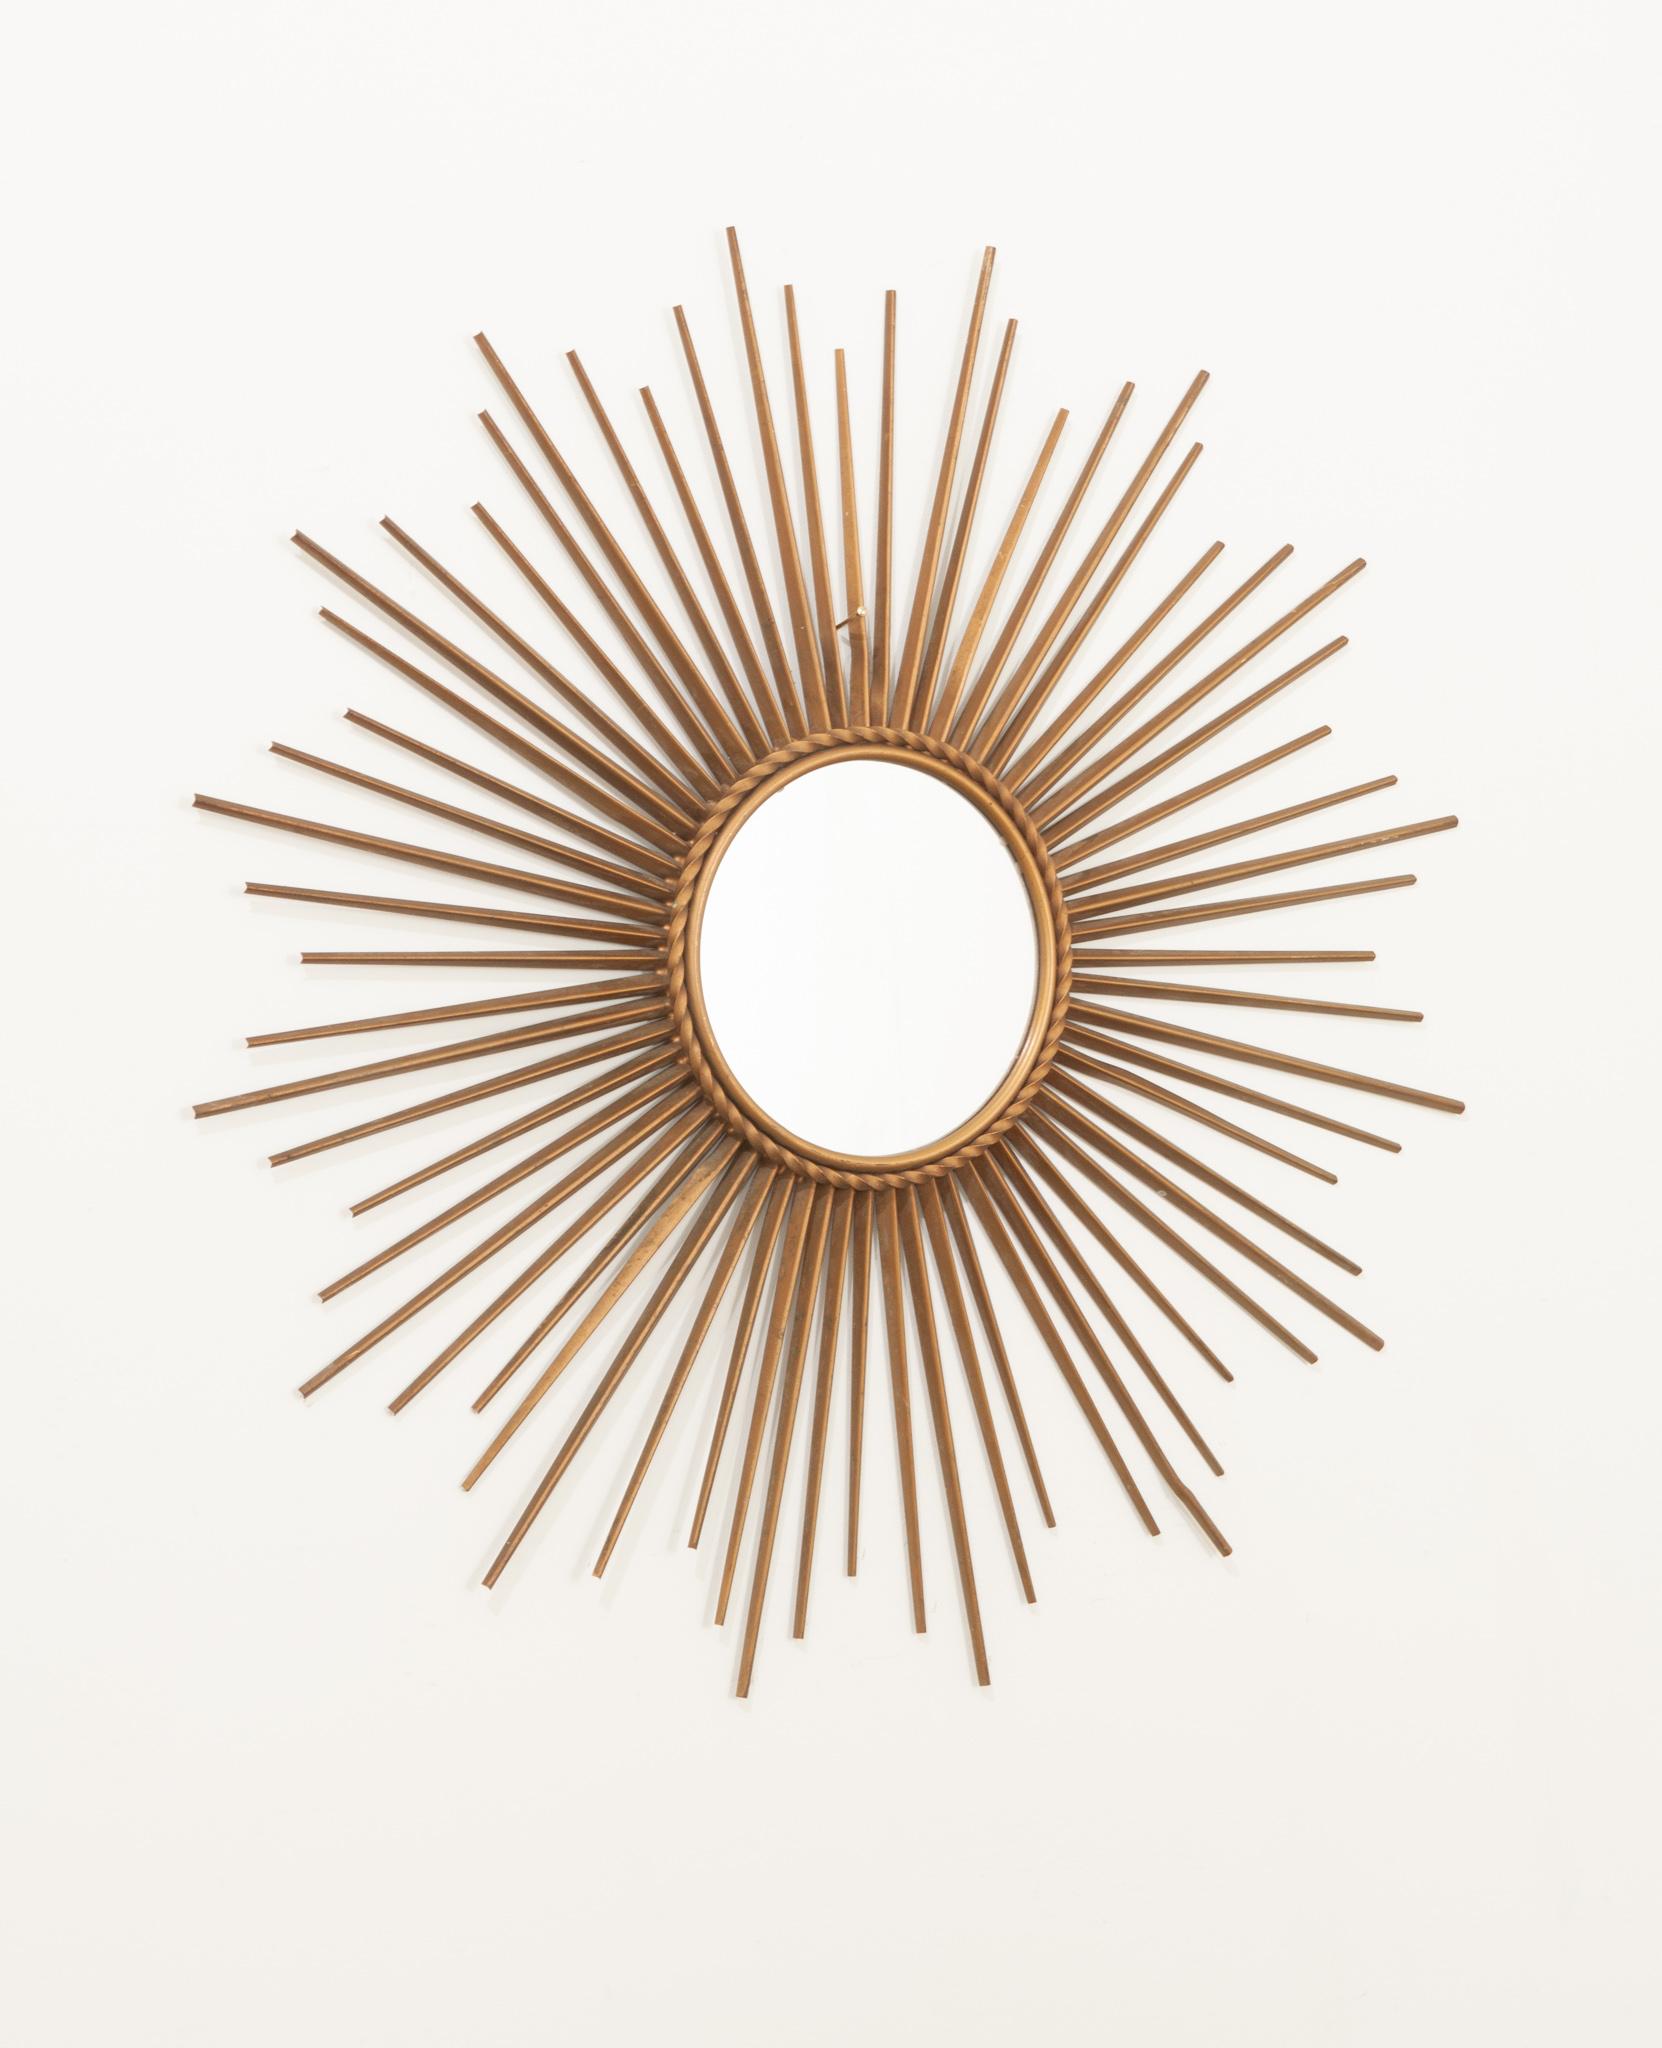 A fantastic Mid-Century Modern decor piece for any space. Sharp brass spikes radiate from the circular vintage mirror plate. The back indicates it was manufactured by Chaty Vallauris, a popular company during the 1960s. In great vintage condition.